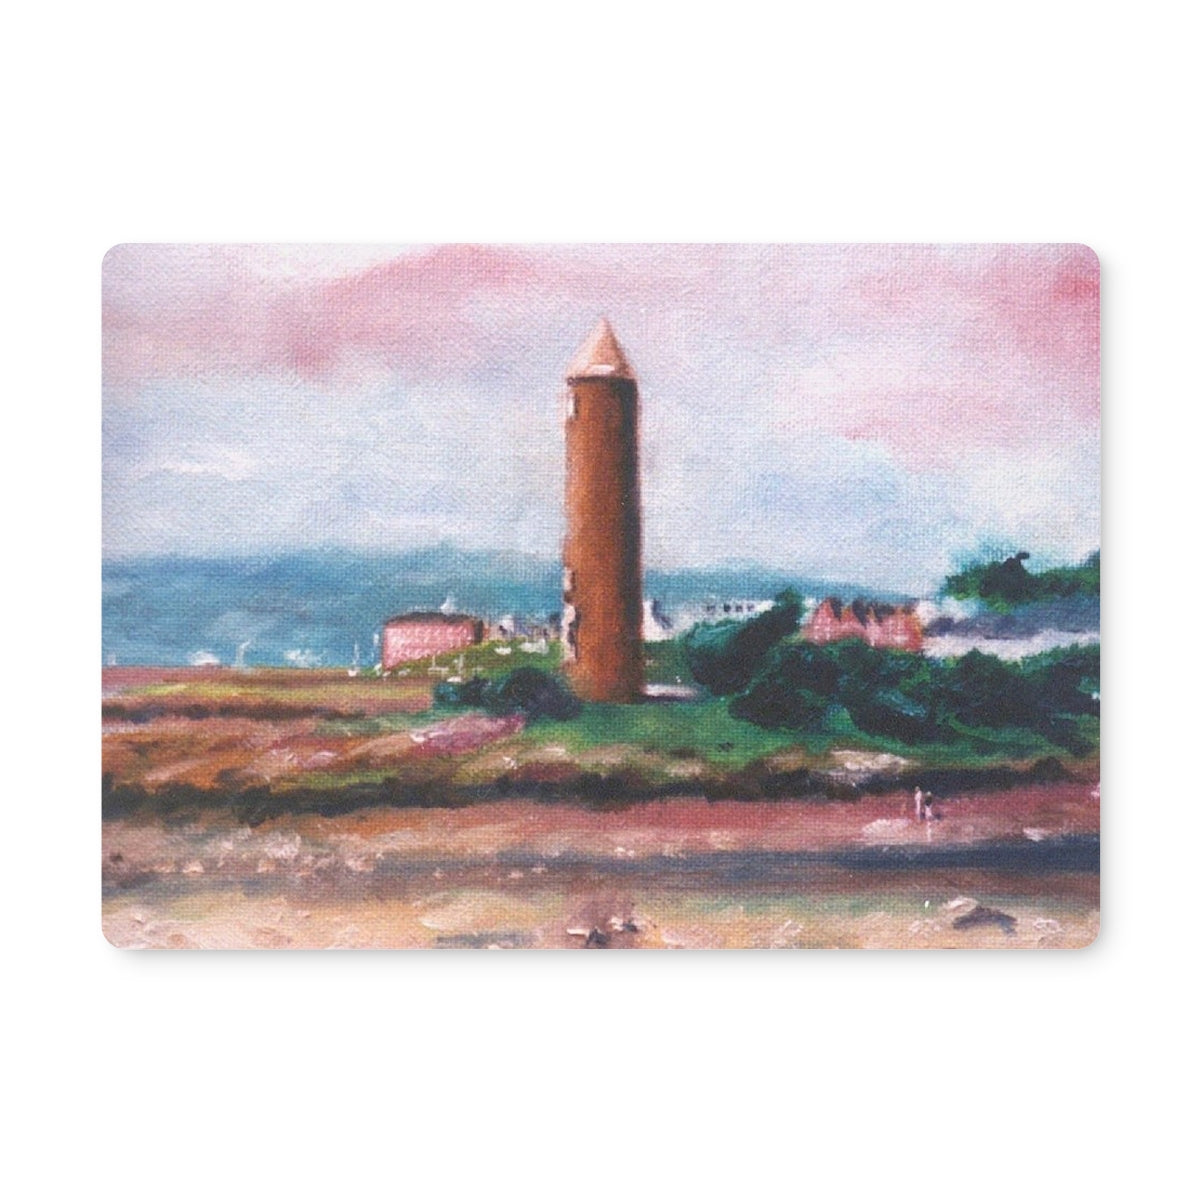 Pencil Point Largs Art Gifts Placemat-Placemats-River Clyde Art Gallery-2 Placemats-Paintings, Prints, Homeware, Art Gifts From Scotland By Scottish Artist Kevin Hunter